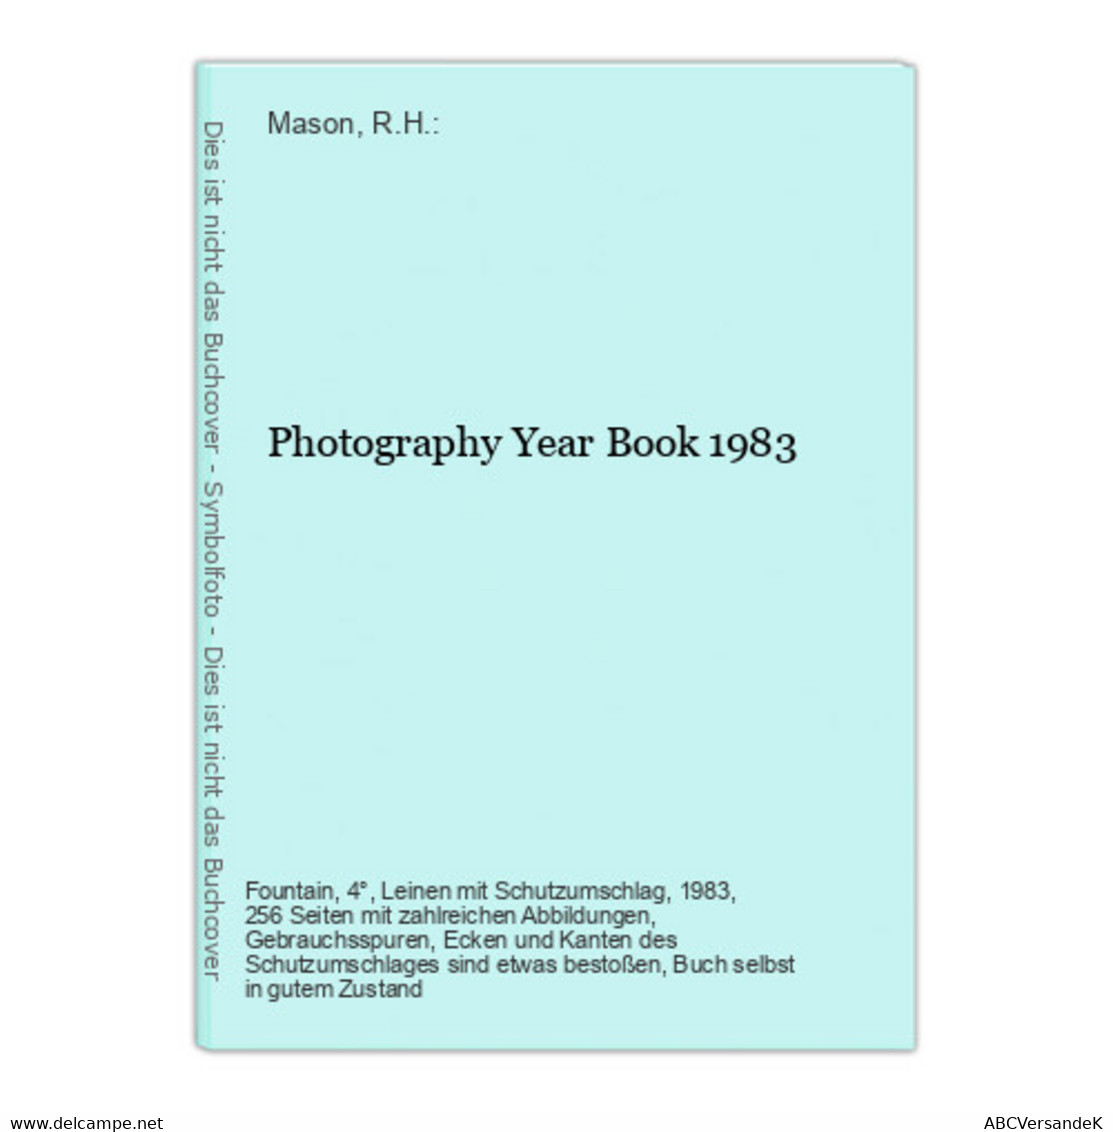 Photography Year Book 1983 - Photographie